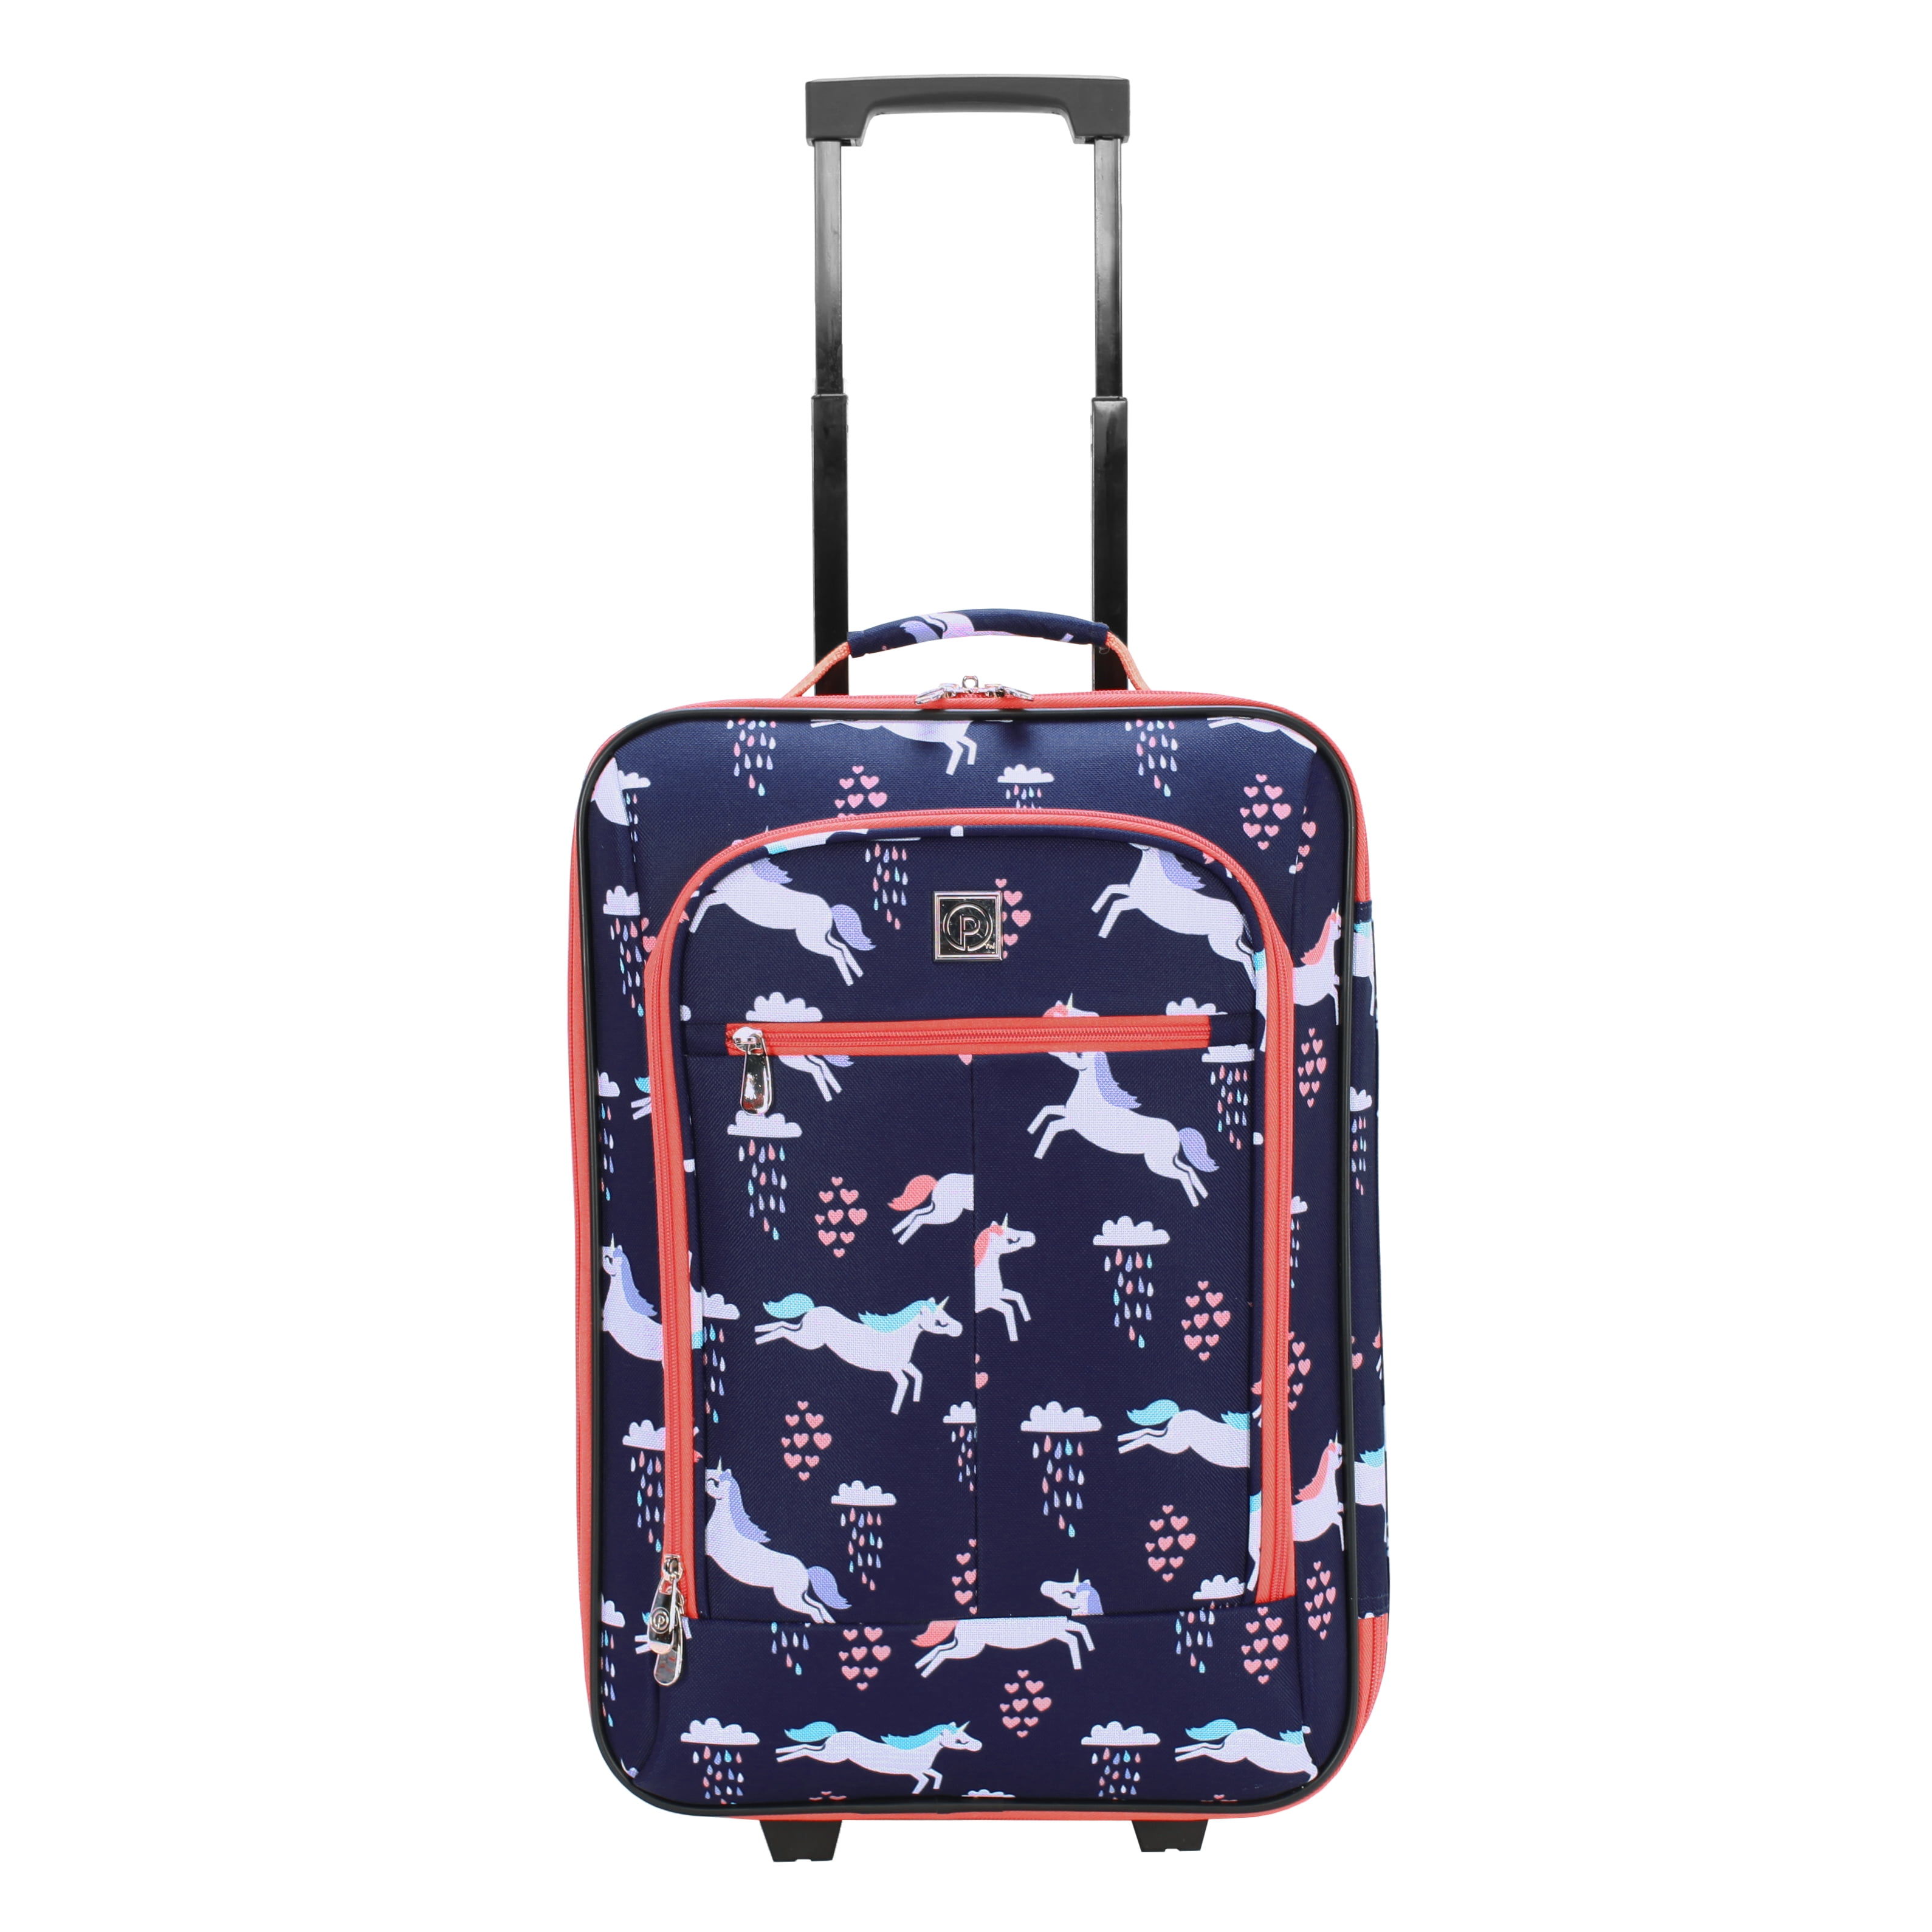 Portable Luggage Duffel Bag Colorful Boats Sea Travel Bags Carry-on In Trolley Handle